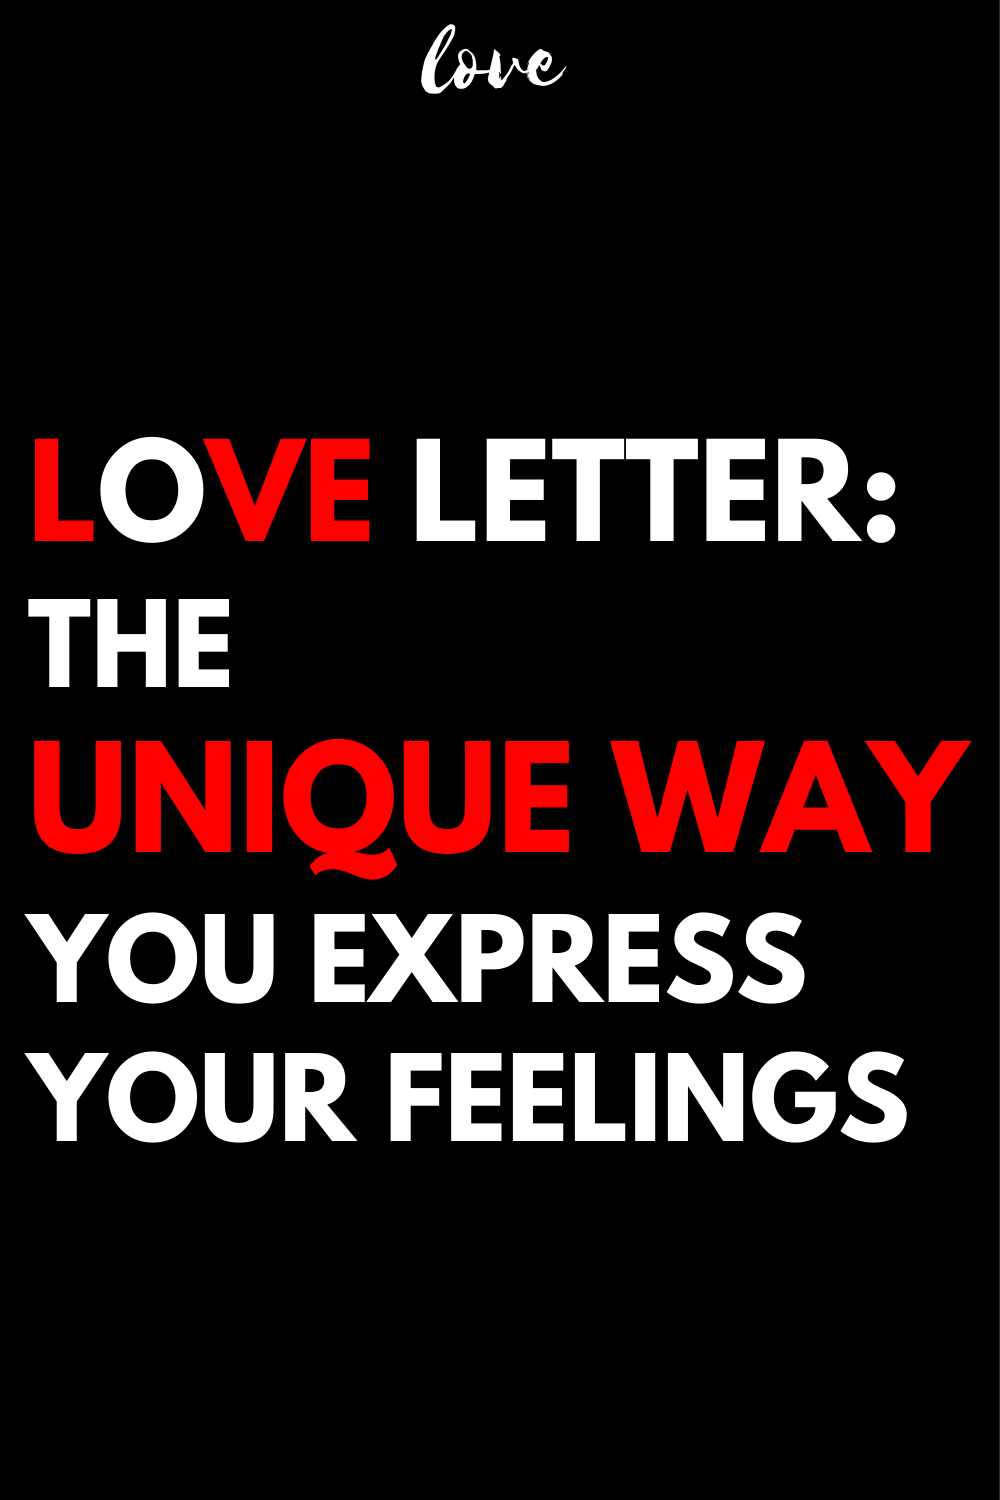 Love letter: the unique way you express your feelings